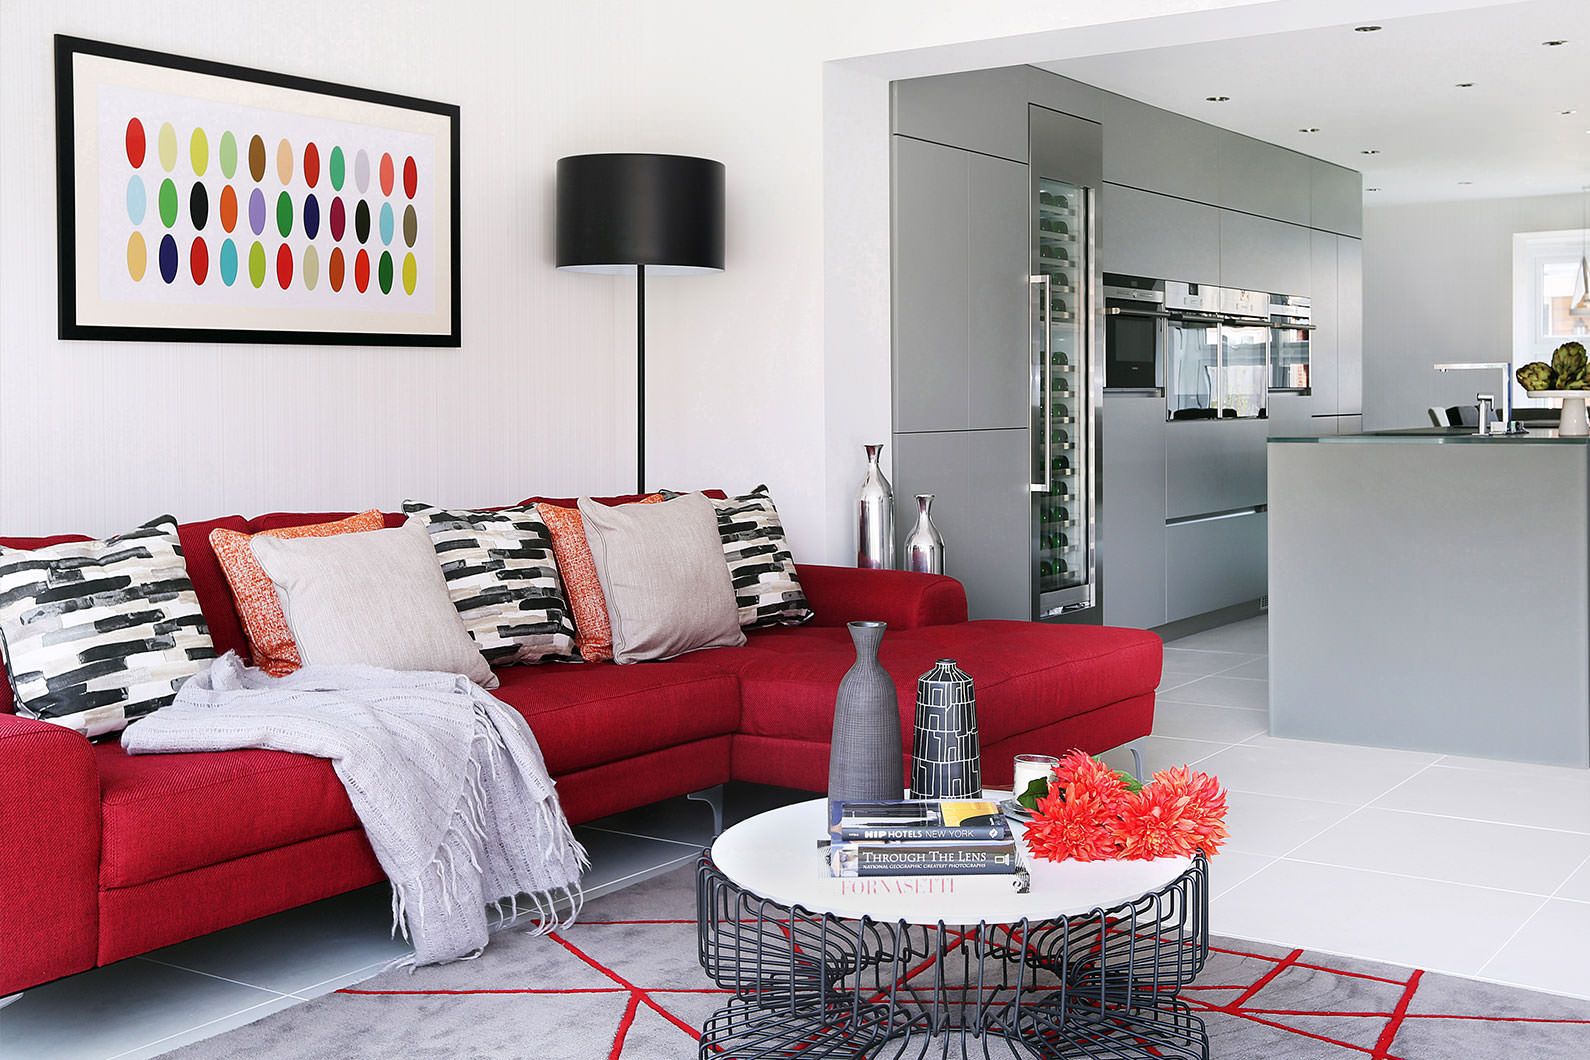 Fair combination of red and gray in the living room